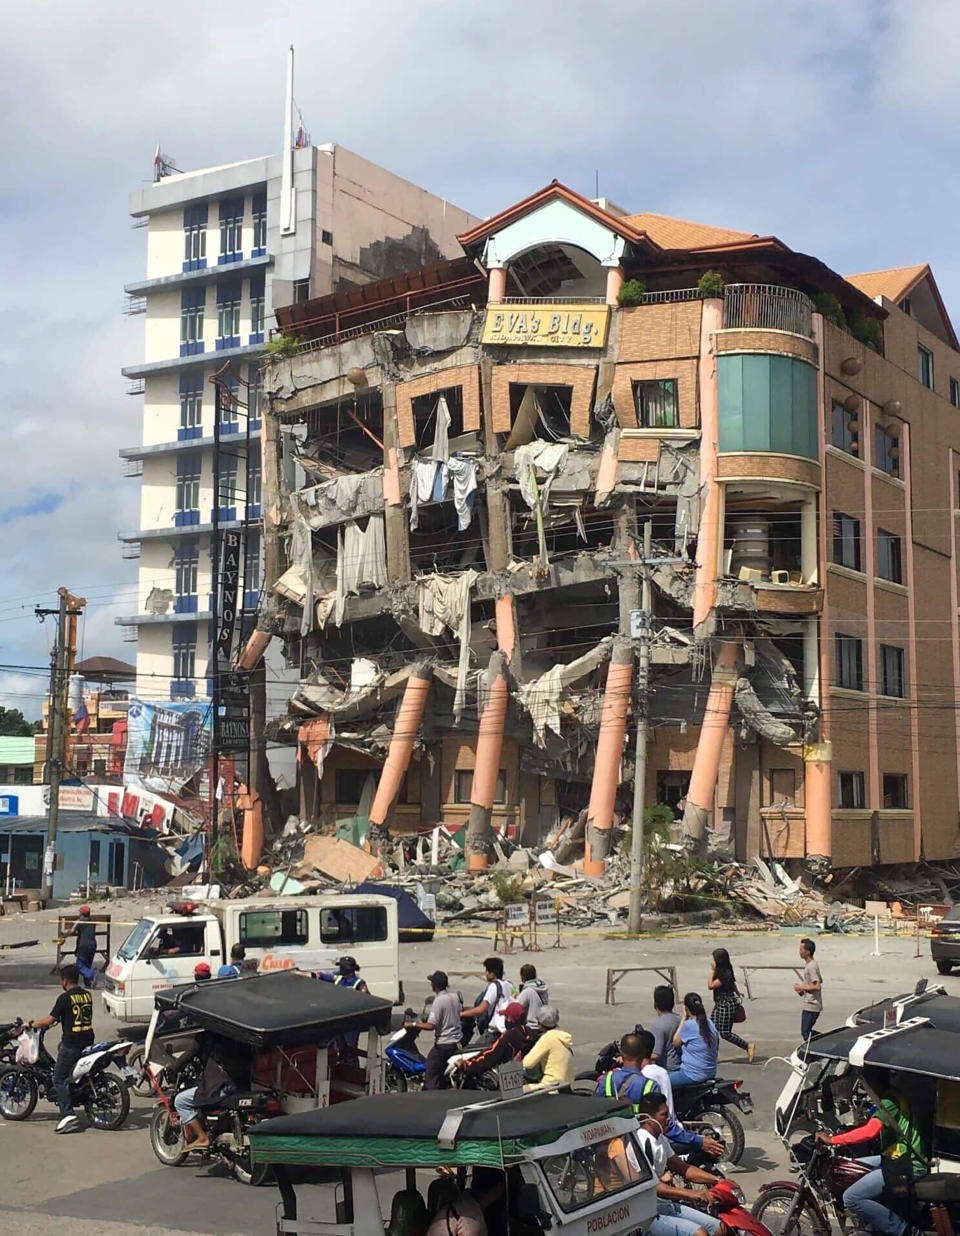 Eva's Hotel stands damaged after a strong earthquake in Kidapawan, north Cotabato province, Philippines, Thursday, Oct. 31, 2019. The third strong earthquake this month jolted the southern Philippines on Thursday morning, further damaging structures already weakened by the earlier shaking. (AP Photos/Williamor Magbanua)